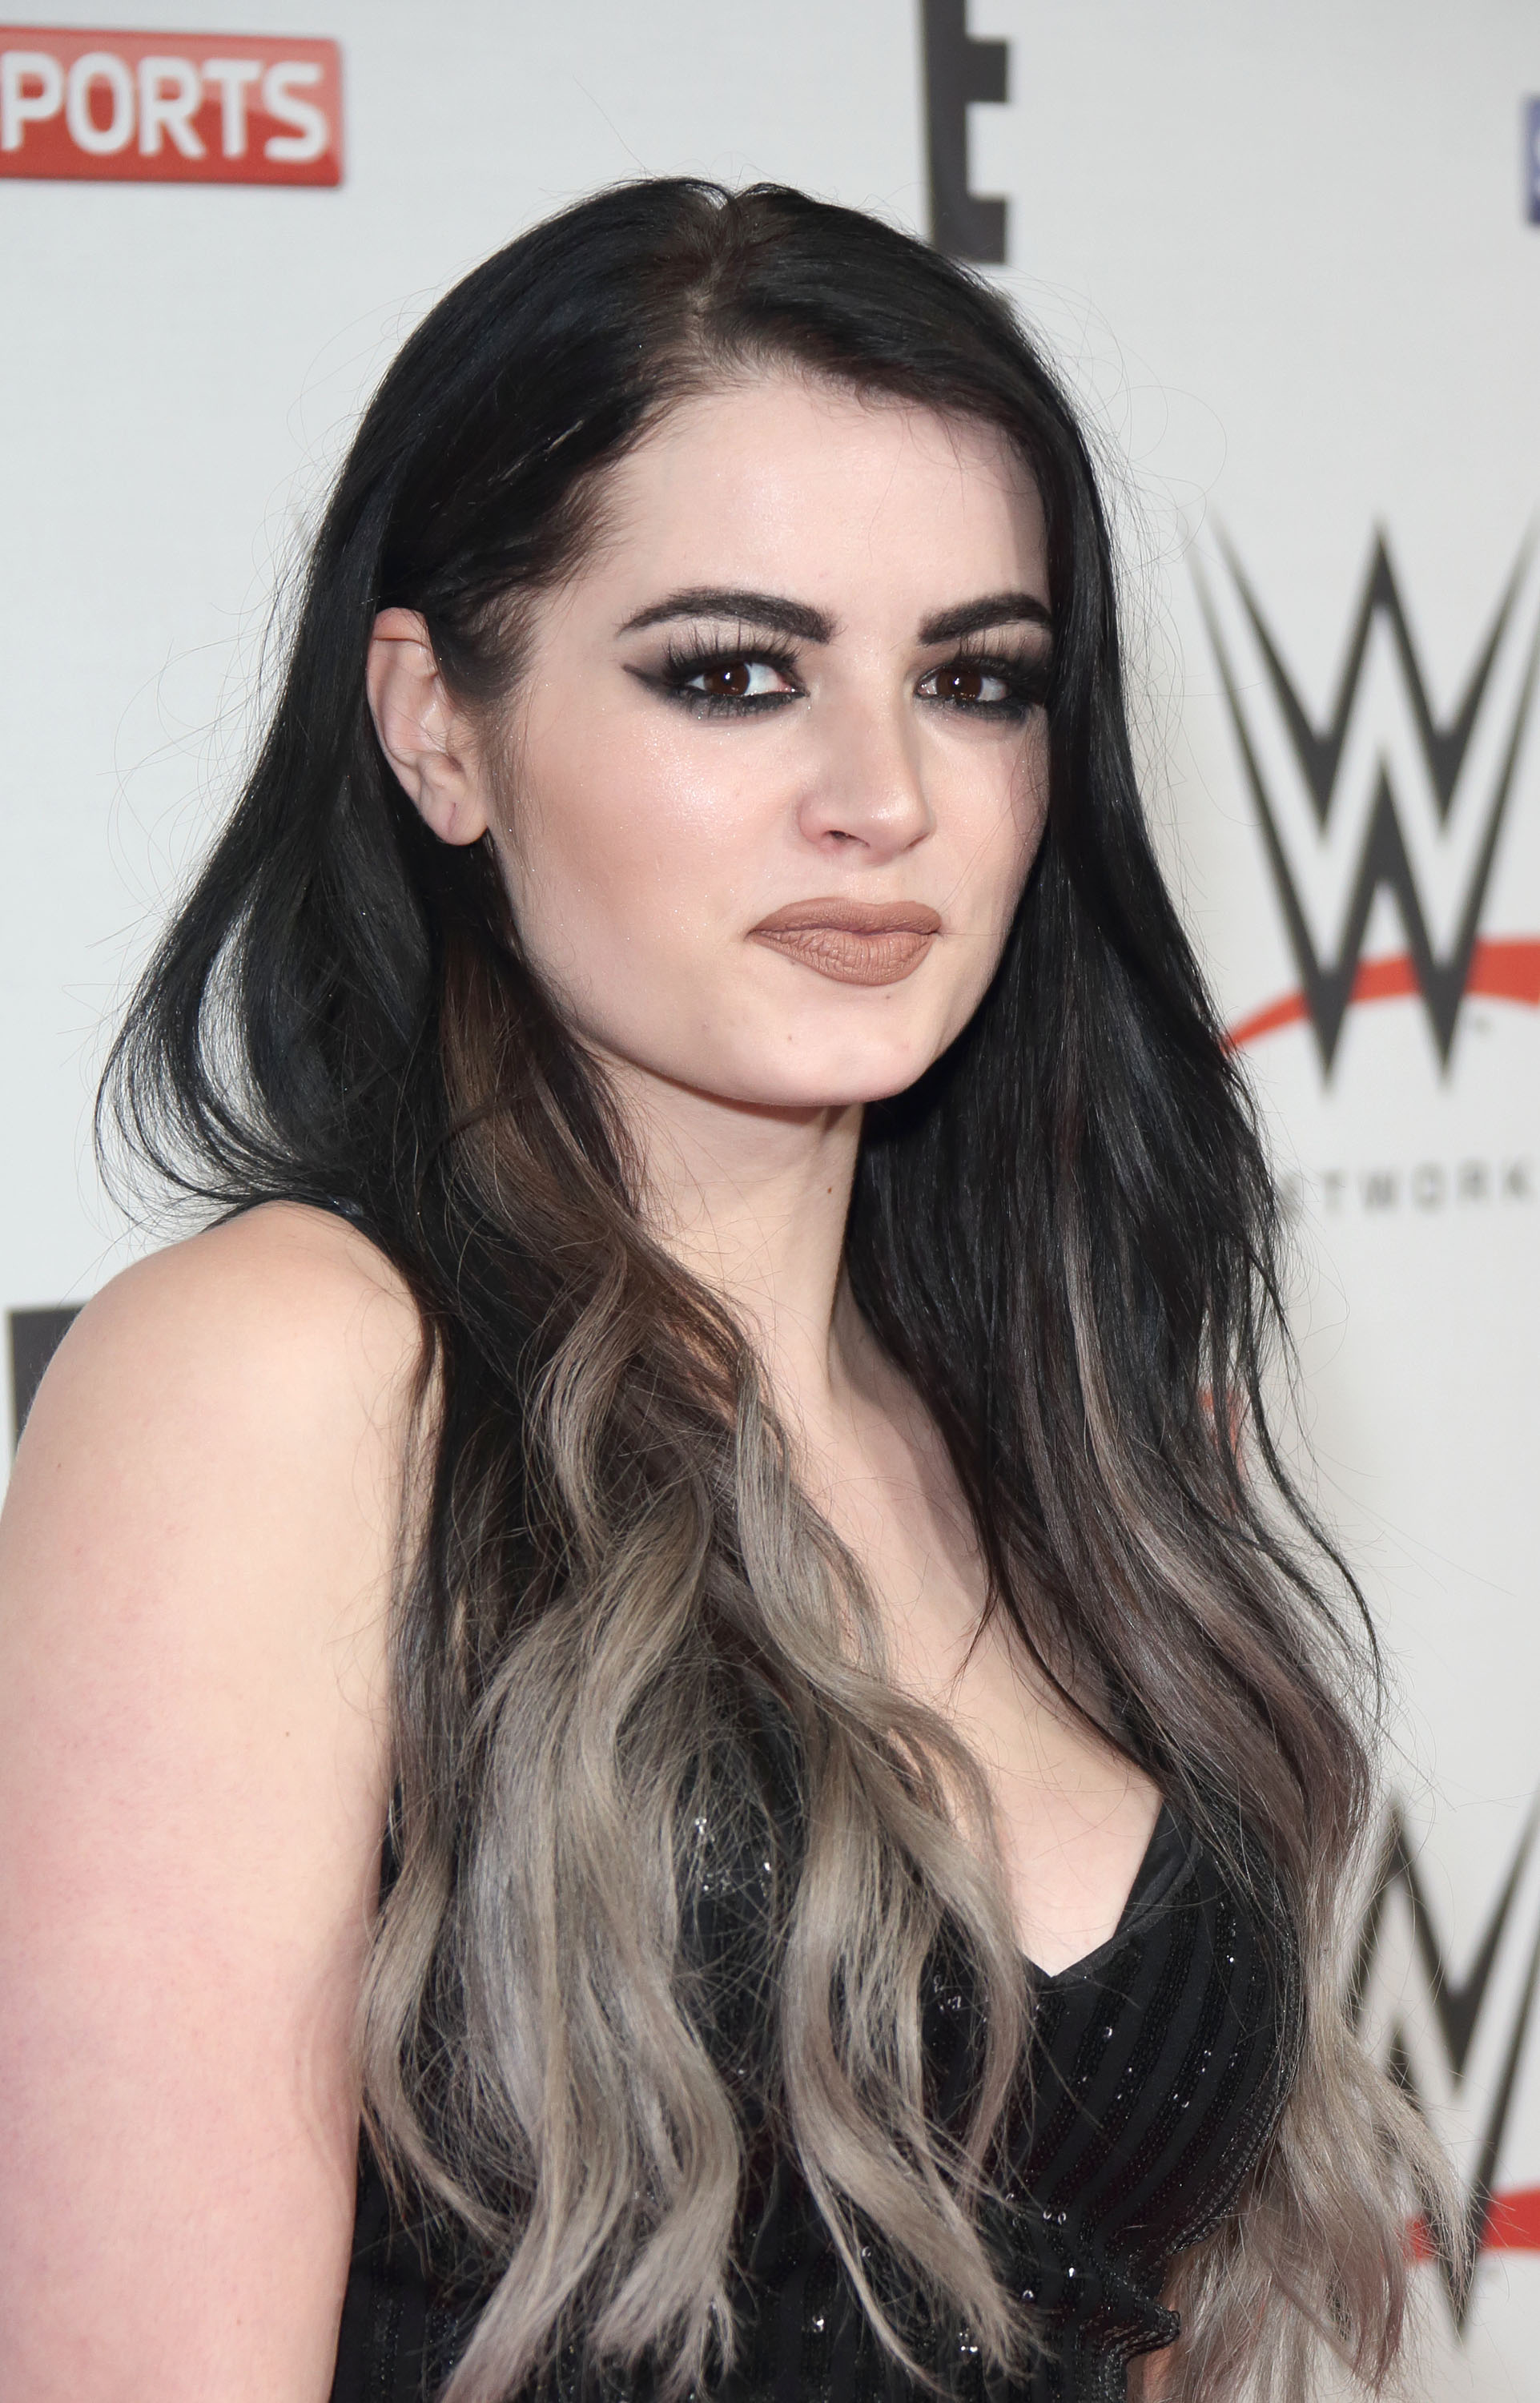 75+ Hot Pictures Of Paige WWE Diva | Best Of Comic Books